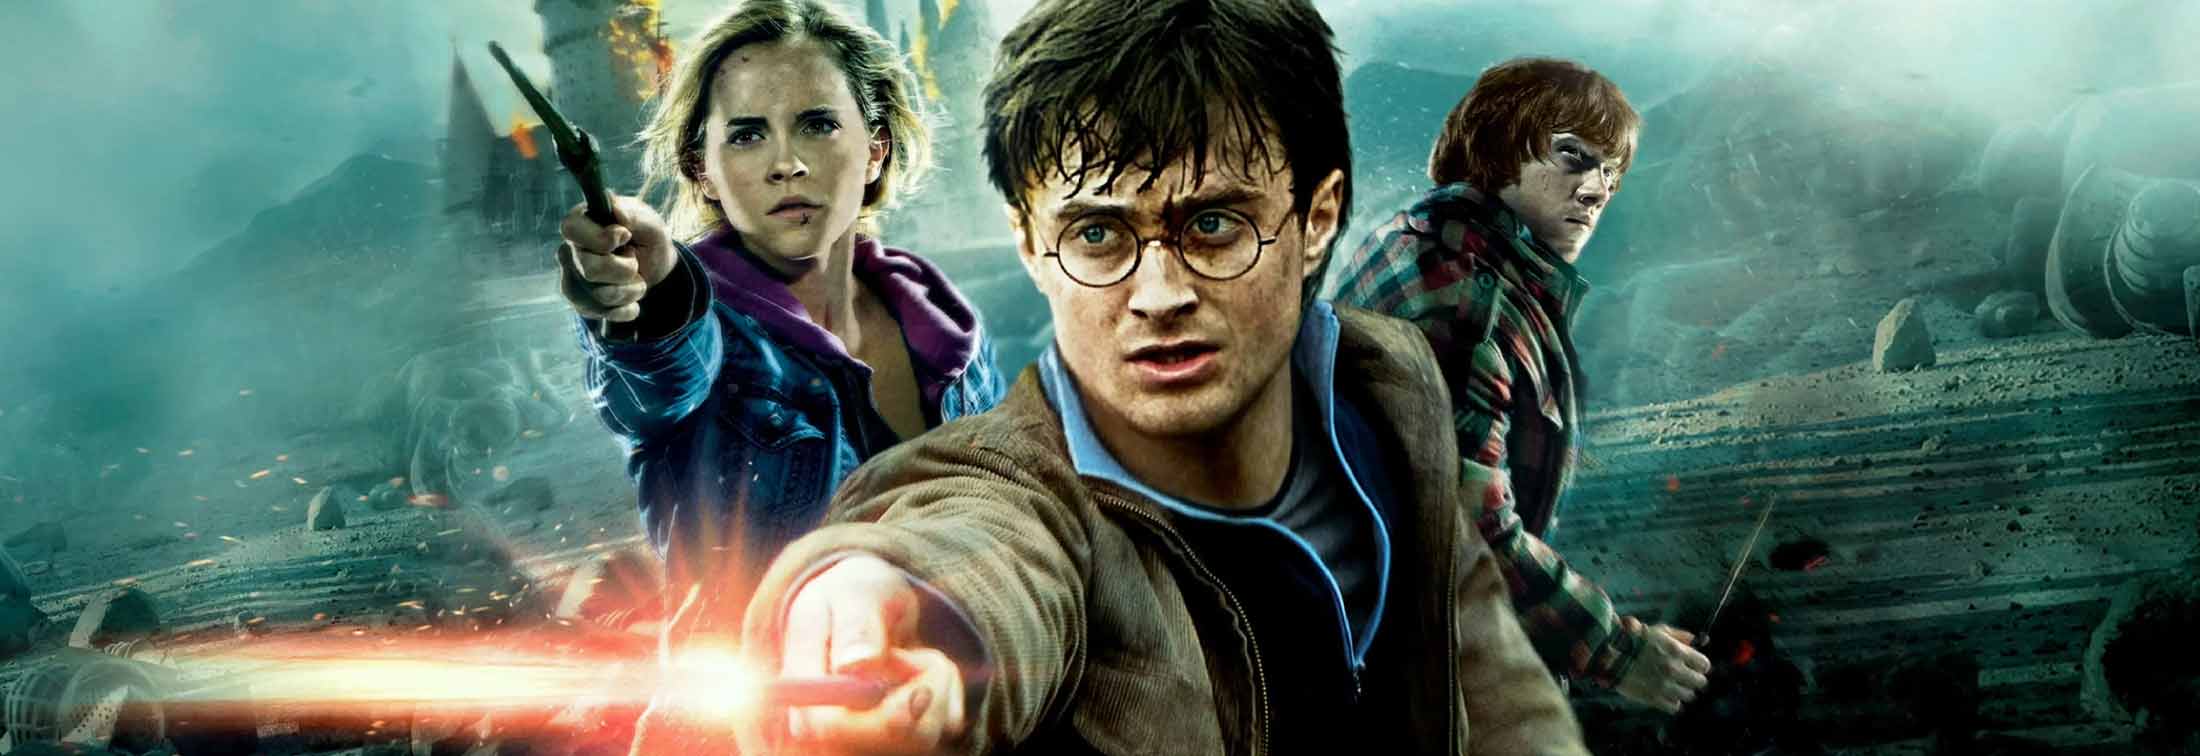 Harry Potter and the Deathly Hallows: Part 2 - 10 years since the boy who lived came to die